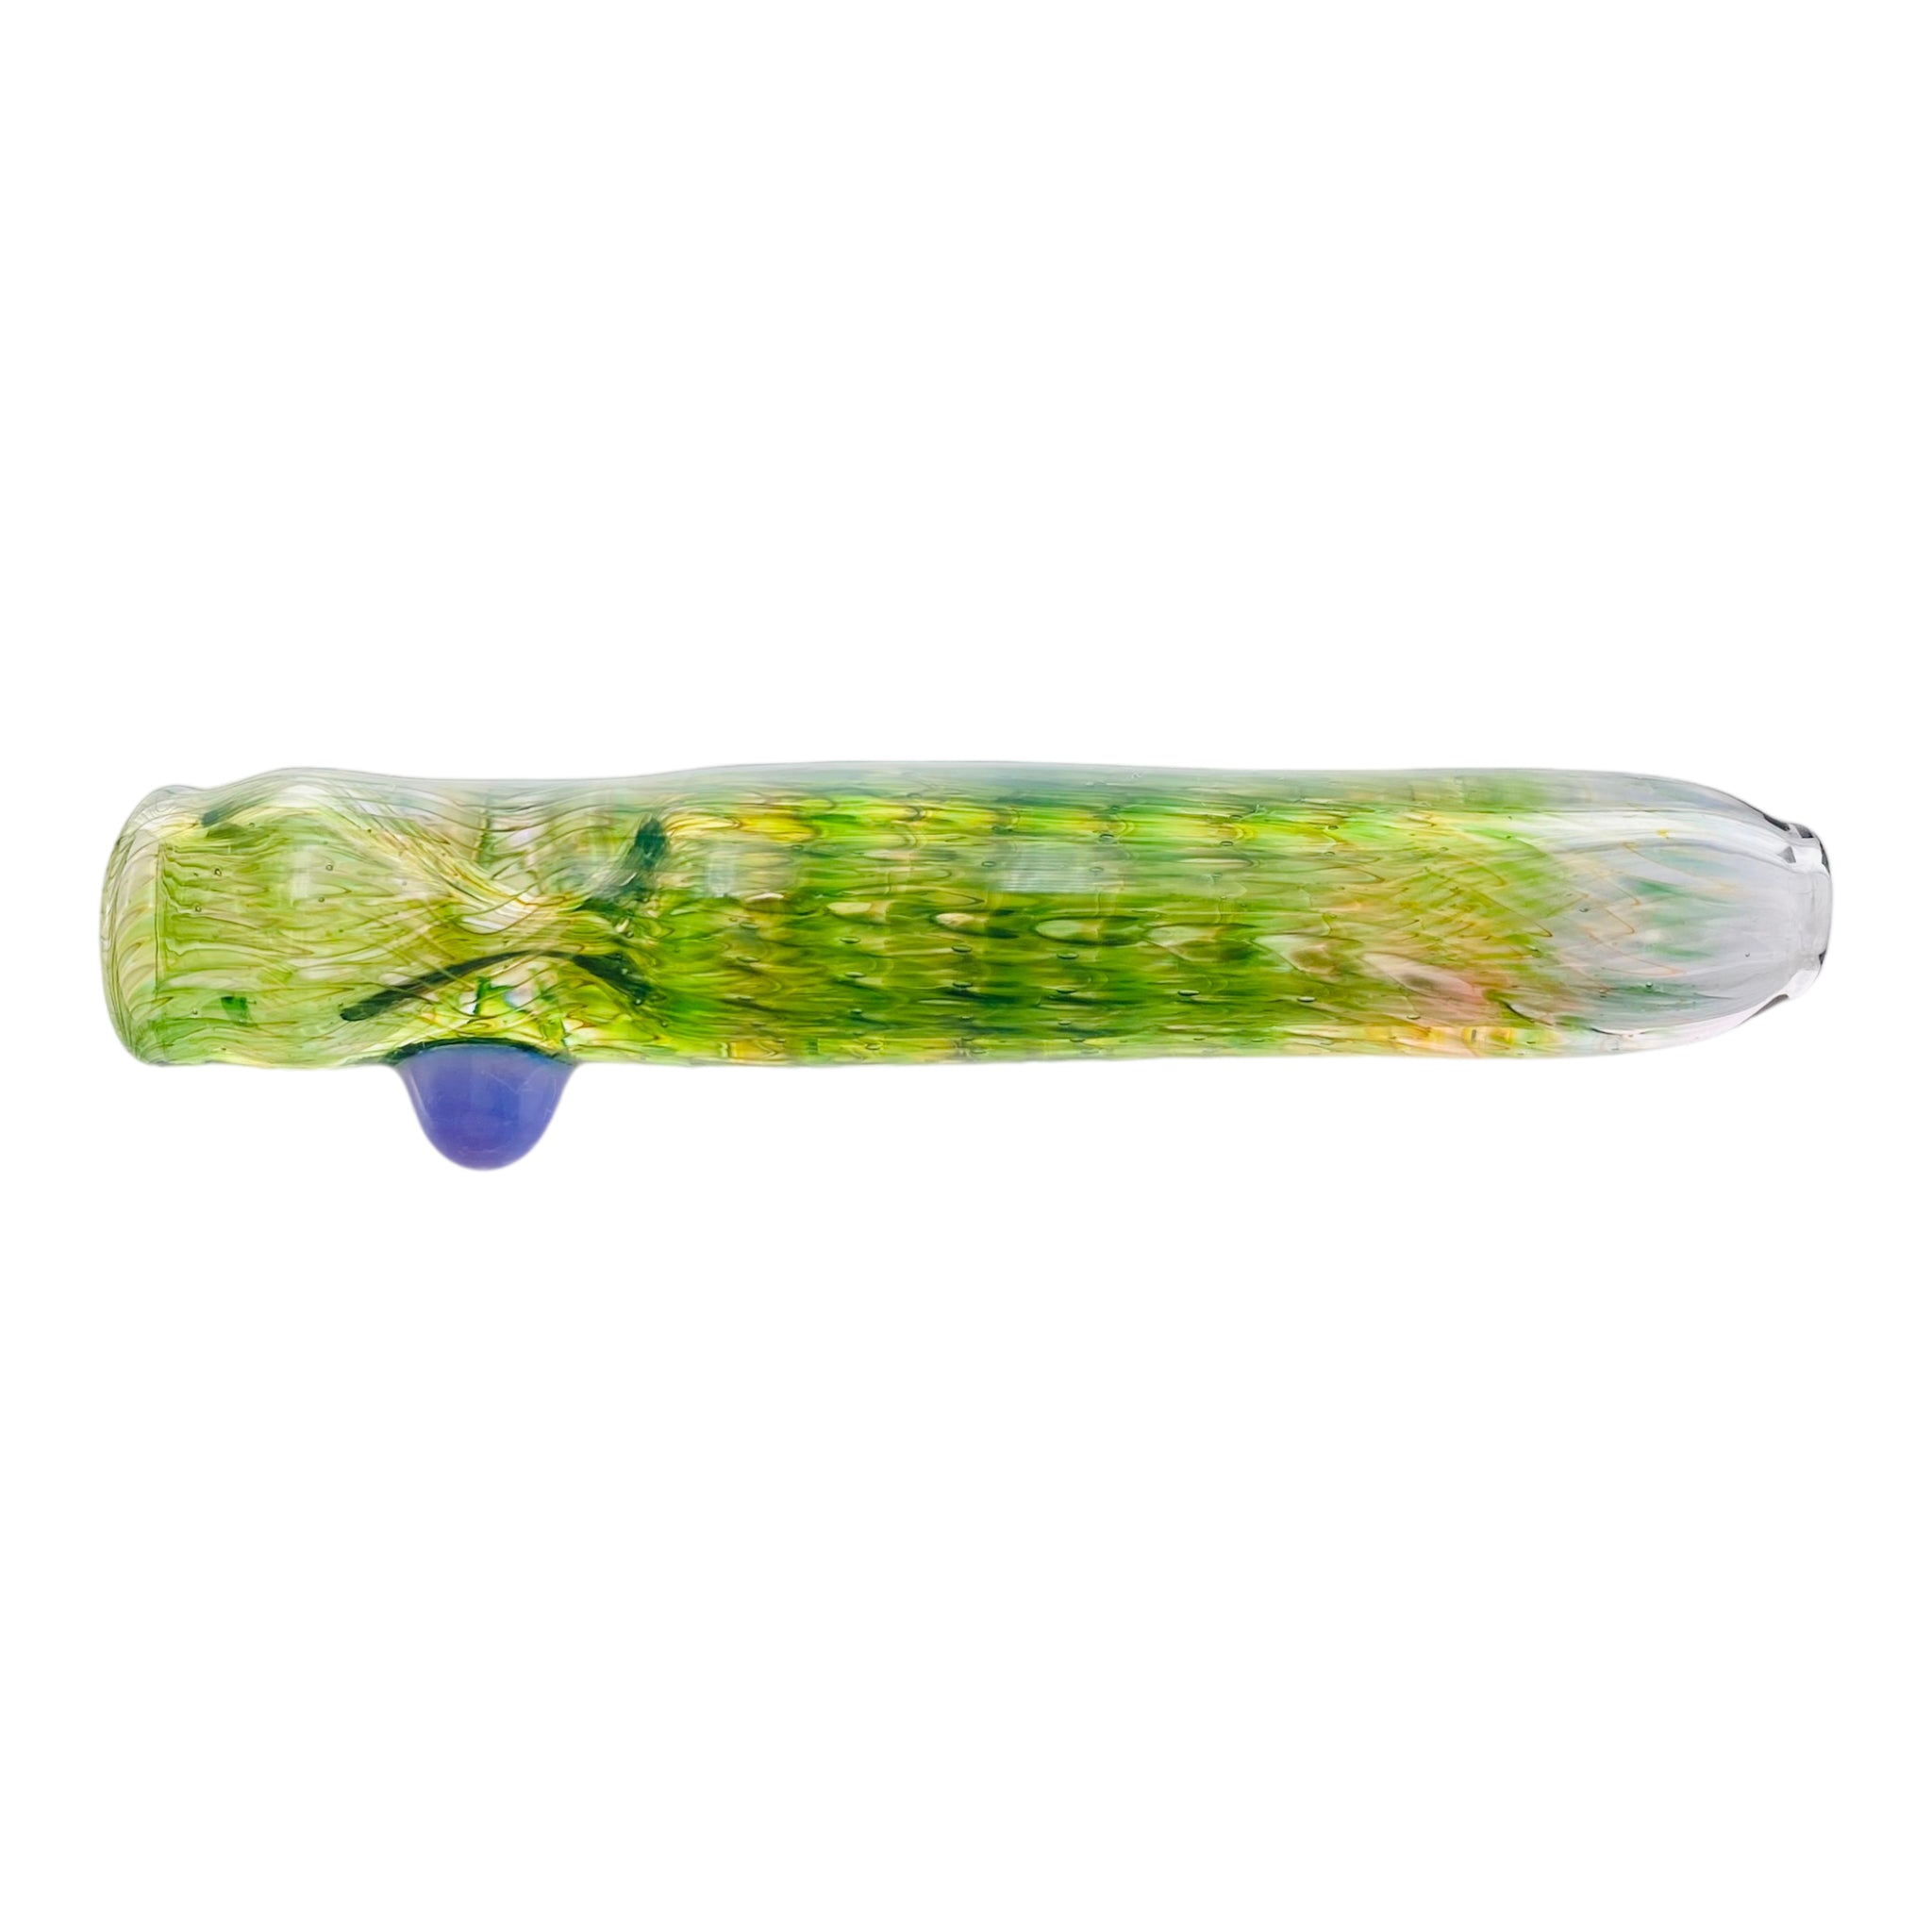 Glass Chillum Pipe - Psychedelic Green Fade With Air Trap Bubbles